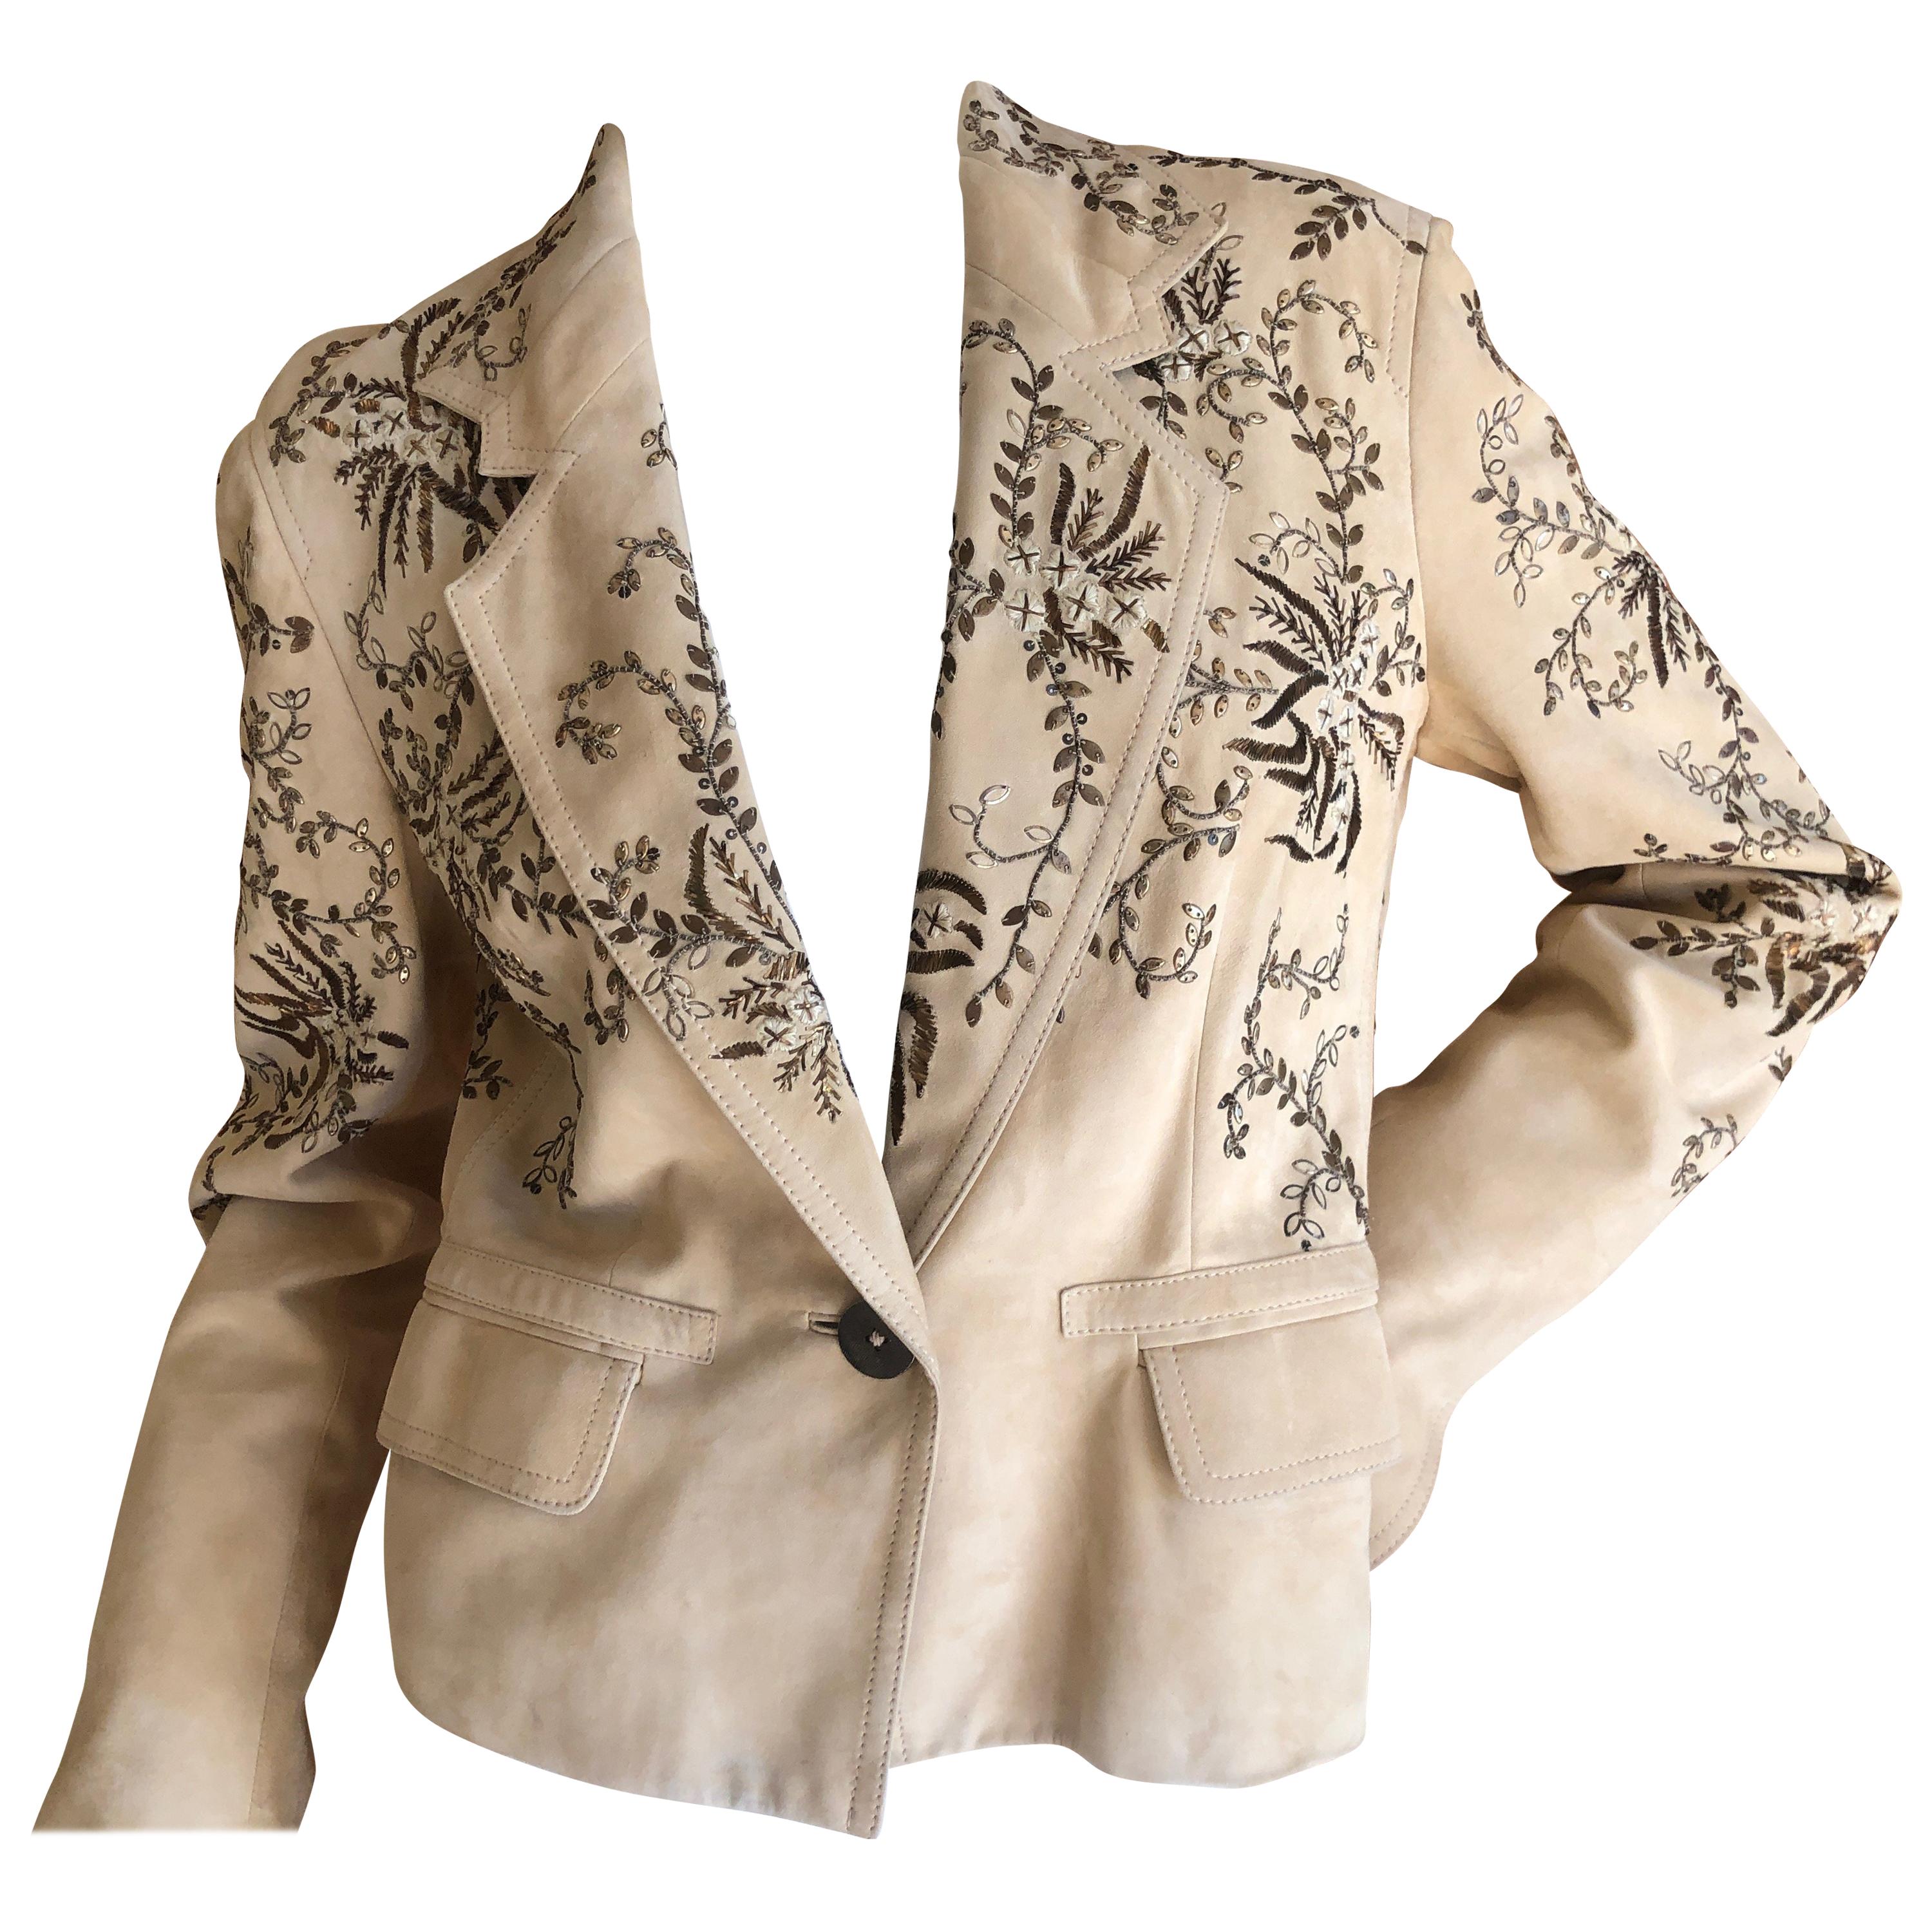 John Galliano Vintage Buff Suede Jacket with Metalwork Embroidery Details im Angebot